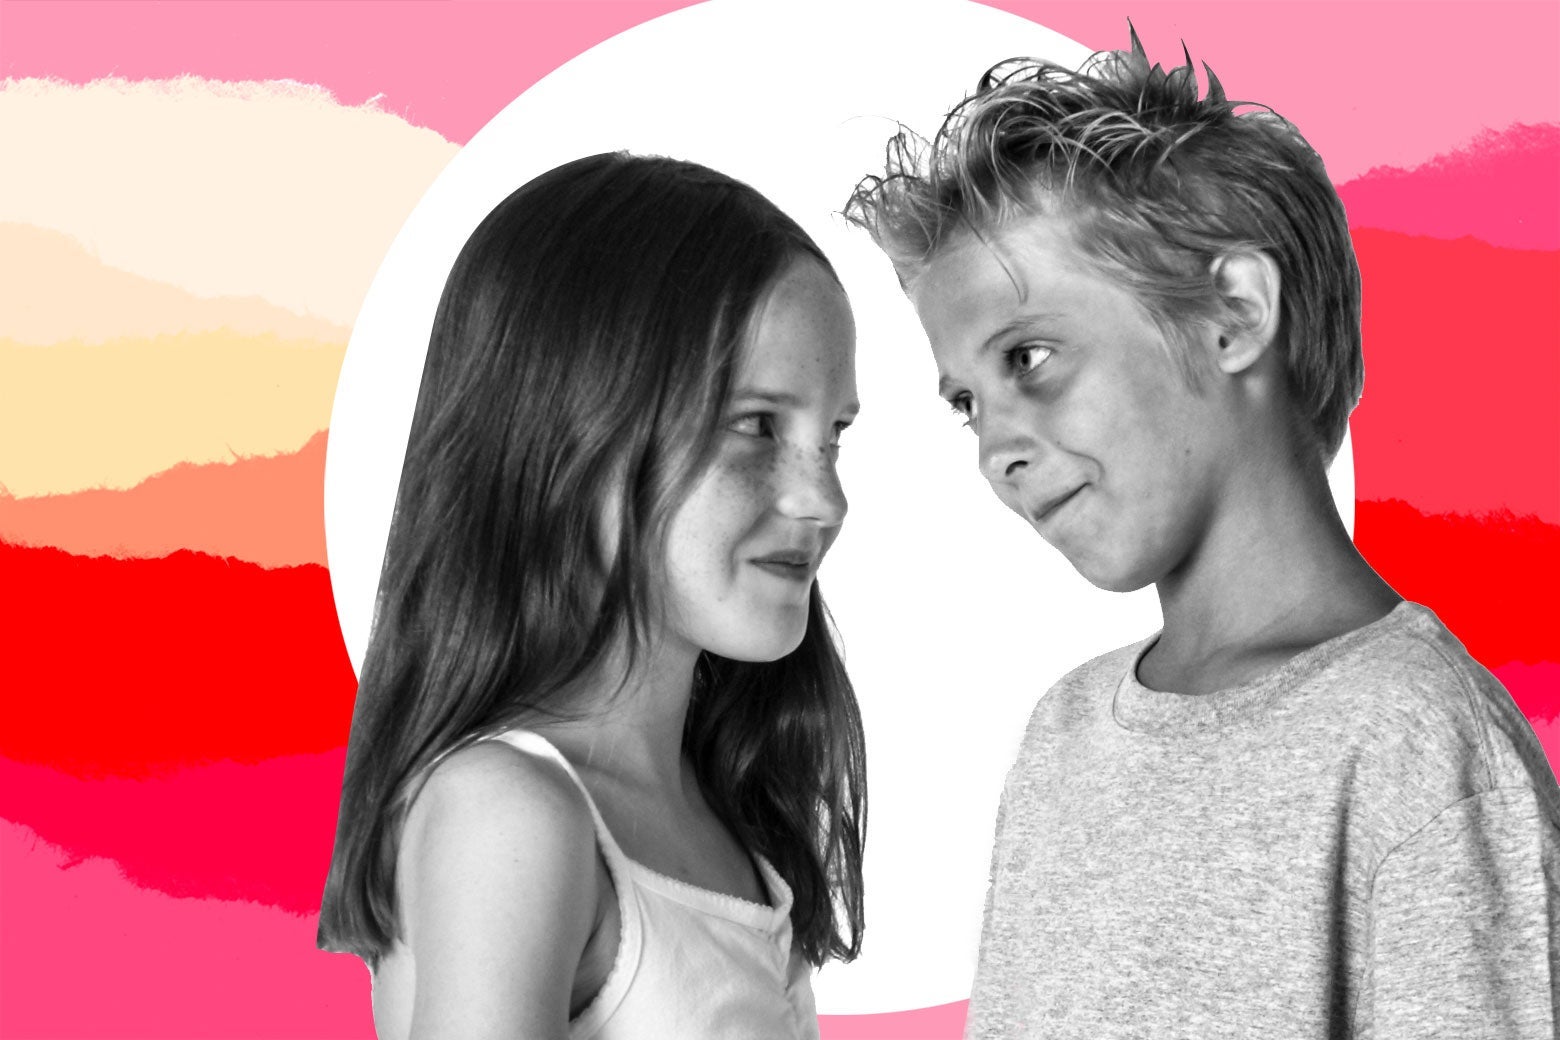 A young boy and young girl face each other.